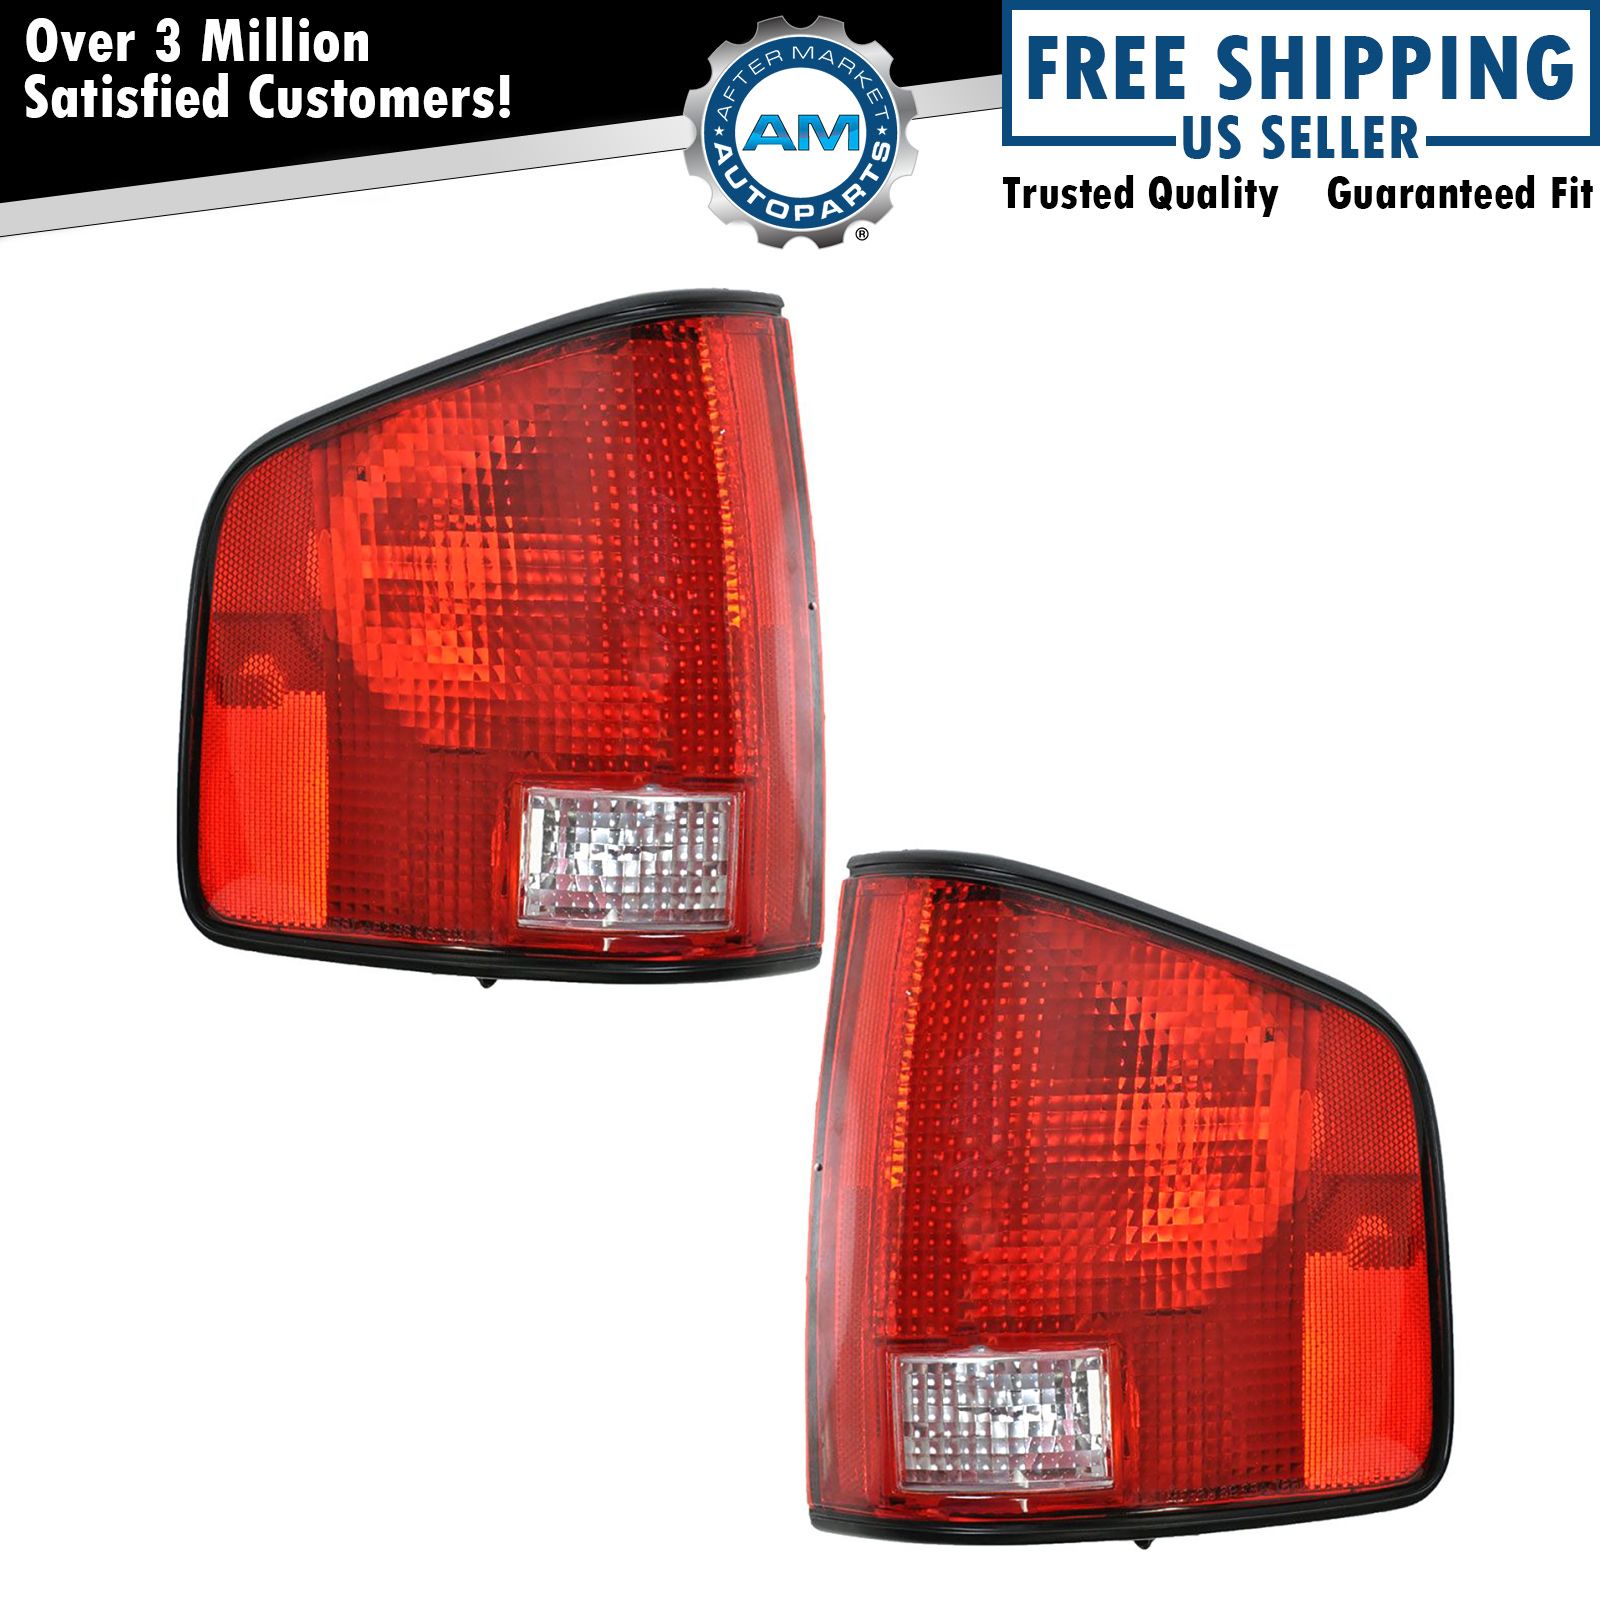 Tail Lights Taillamps Rear Pair Set for 94-04 Chevy S10 GMC S15 Sonoma Hombre